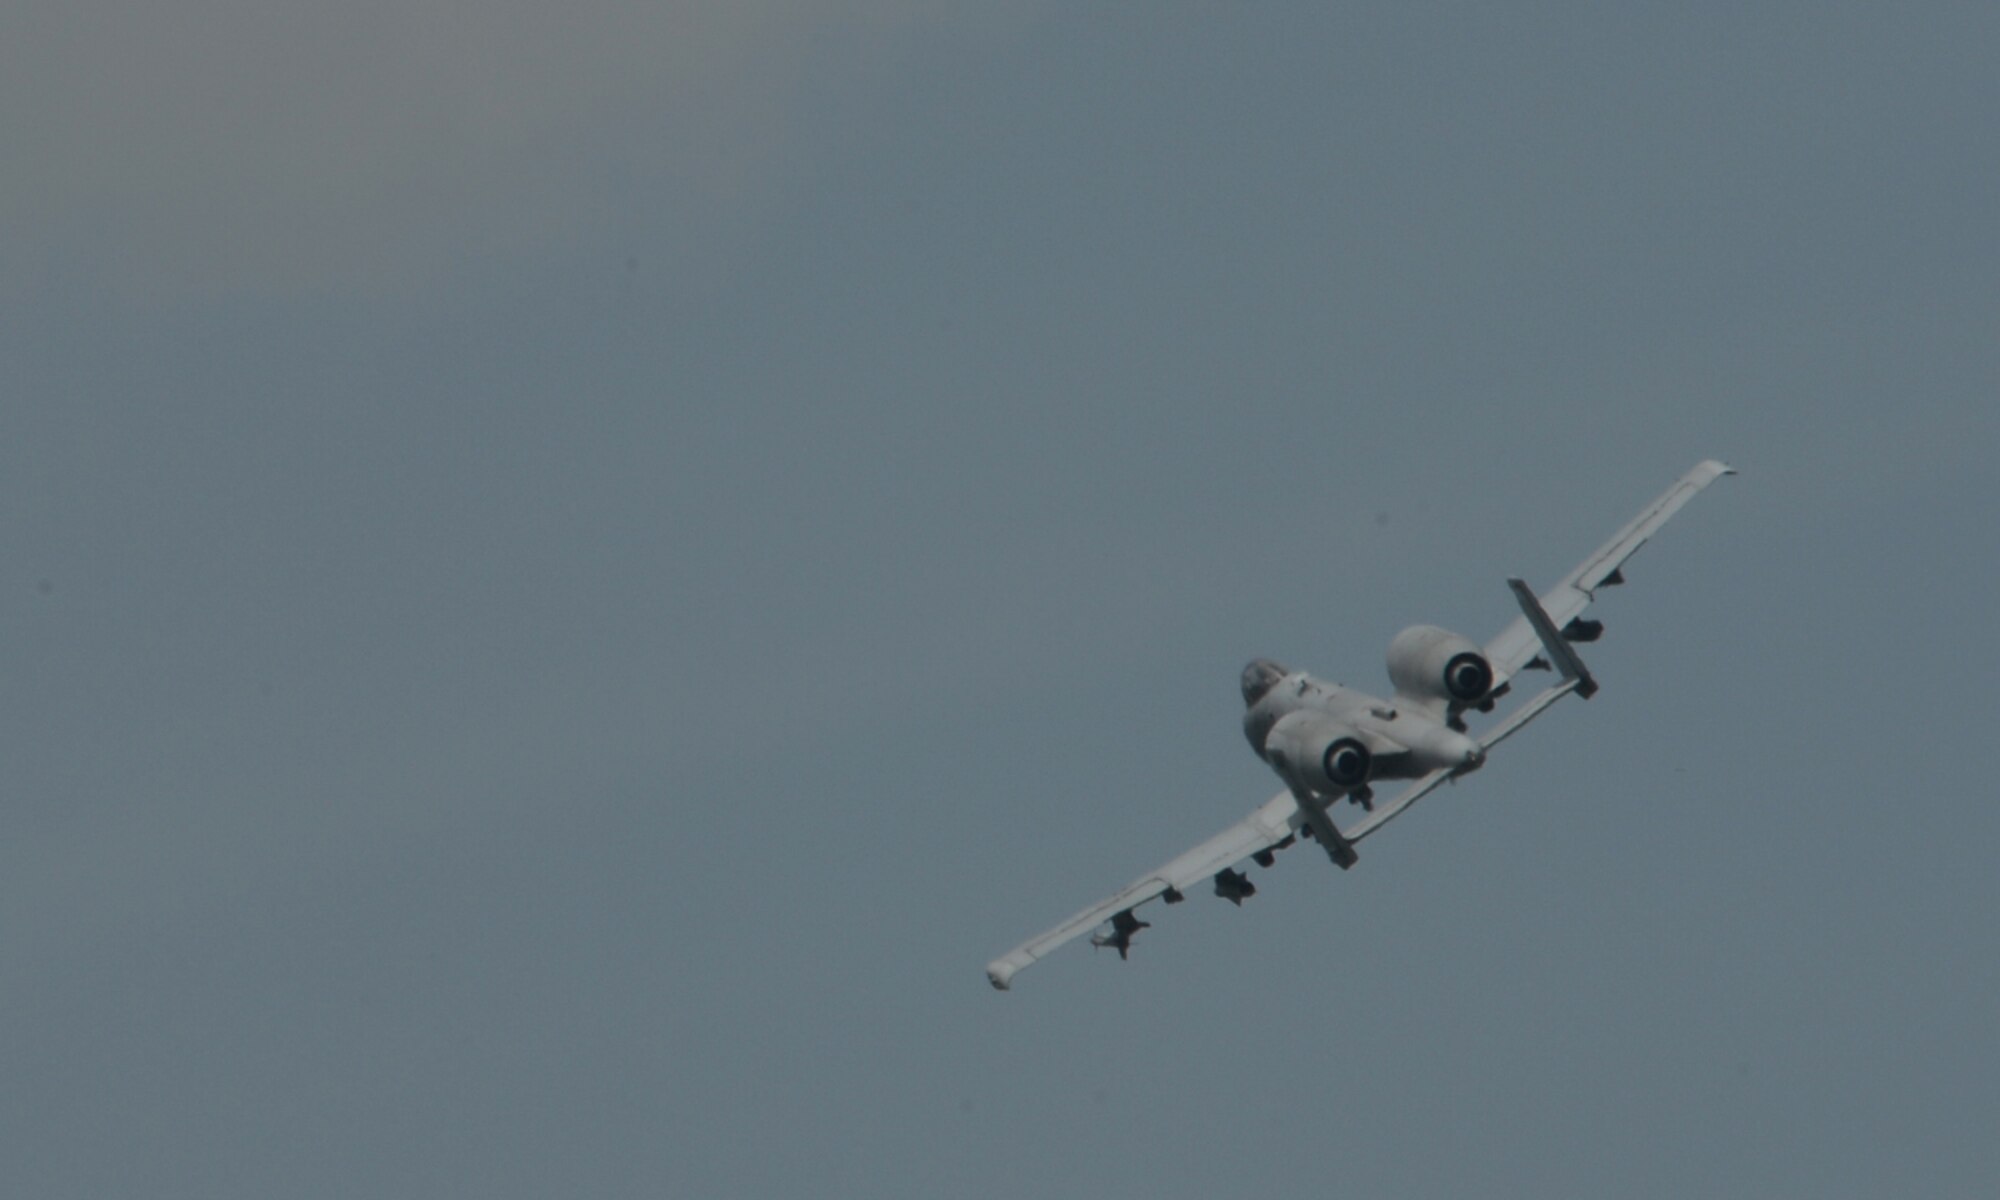 A U.S. Air Force A-10 Thunderbolt II attack aircraft flies during a theater security package deployment at Sliac Air Base, Slovakia, May 20, 2015. The U.S. Air Force’s forward presence in Europe allows cooperation among NATO allies and partners to develop and improve ready air forces capable of maintaining regional security. (U.S. Air Force photo by Senior Airman Dylan Nuckolls/Released)